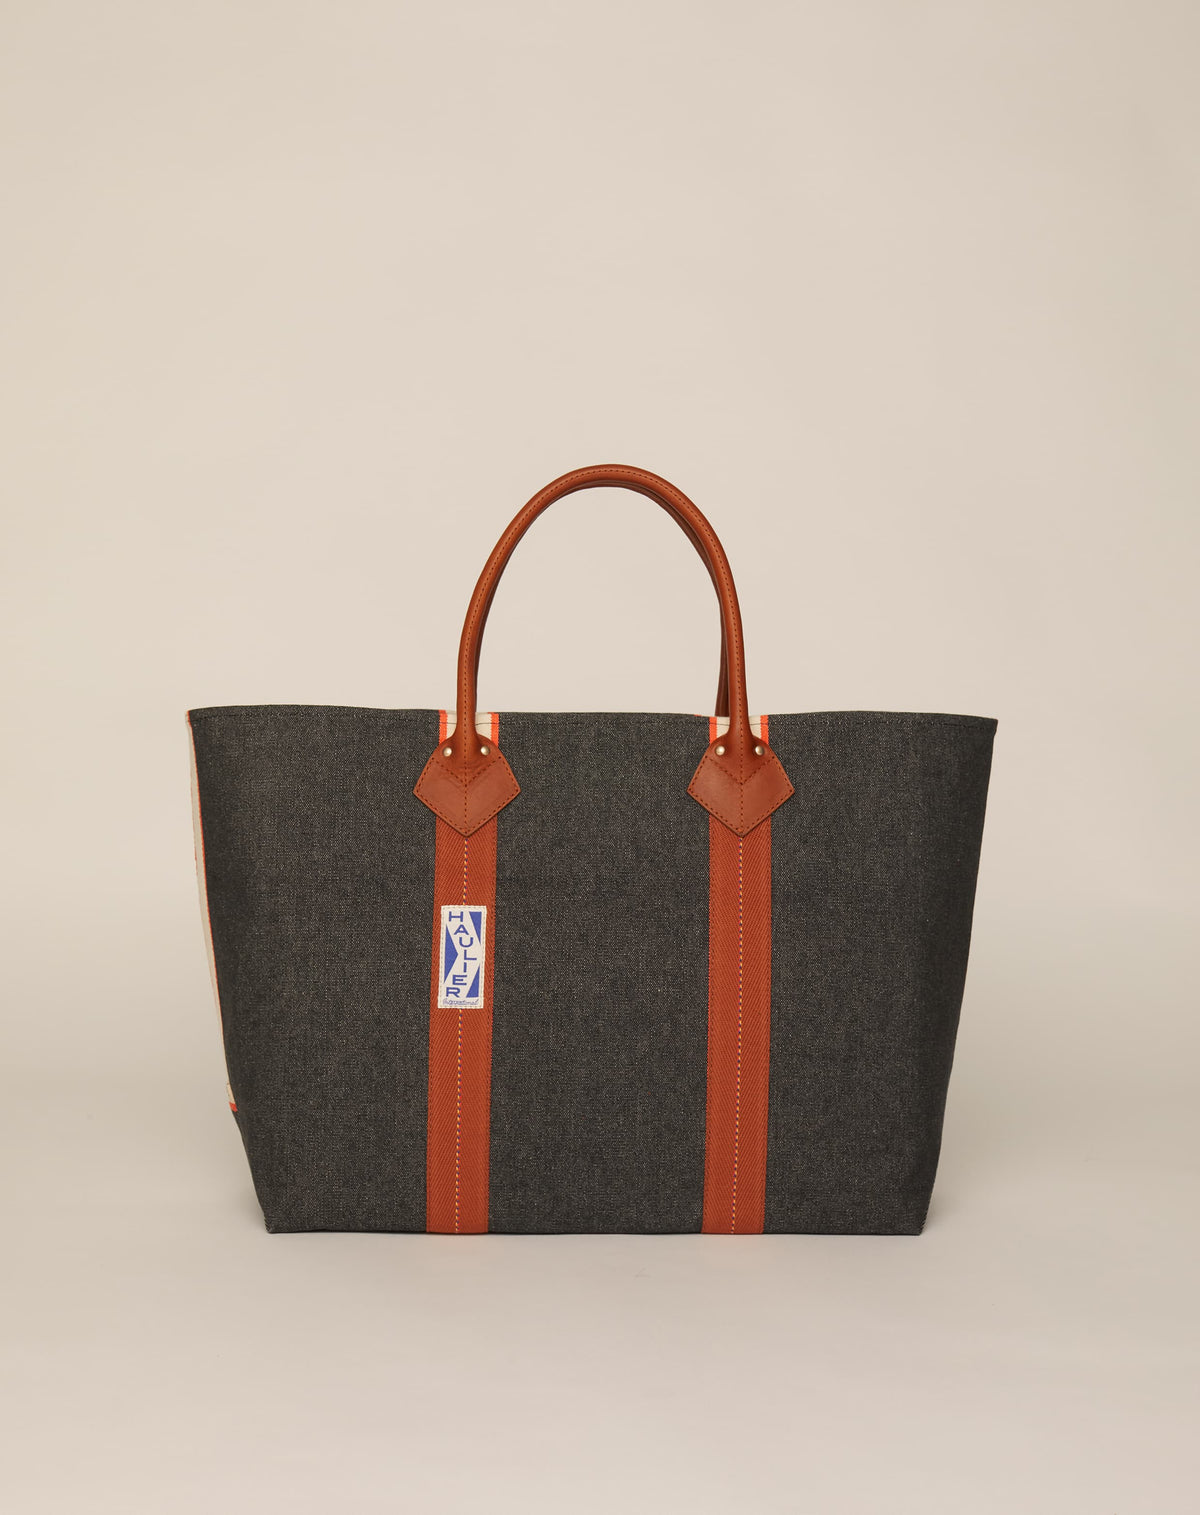 Image of classic canvas tote bag in washed black colour with tan leather handles and contrasting stripes.